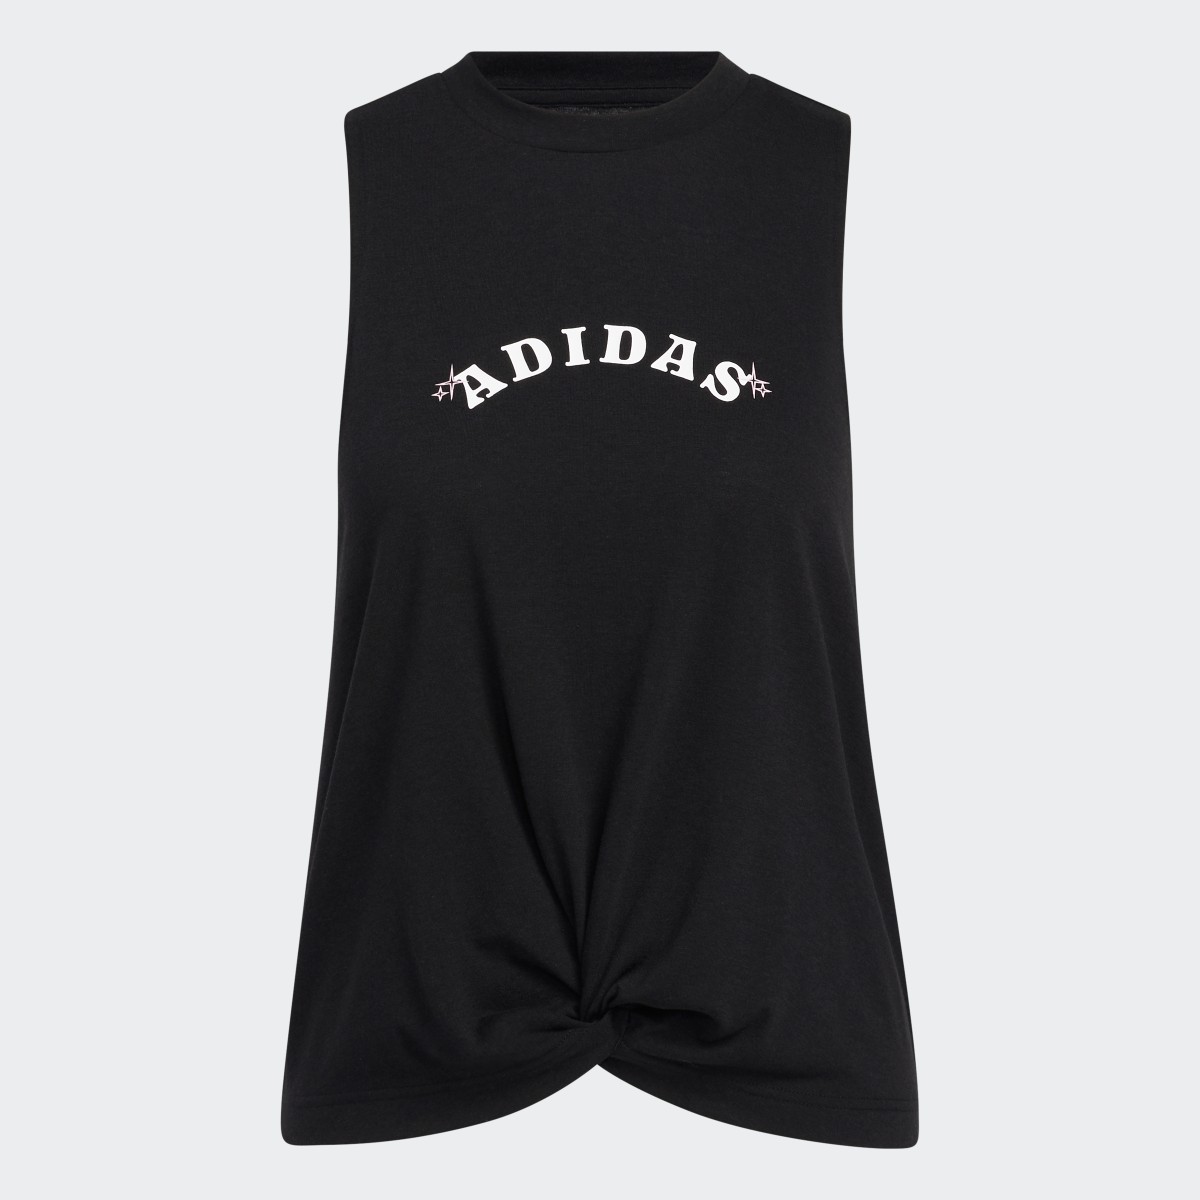 Adidas Bloom Knotted Tank Top. 5